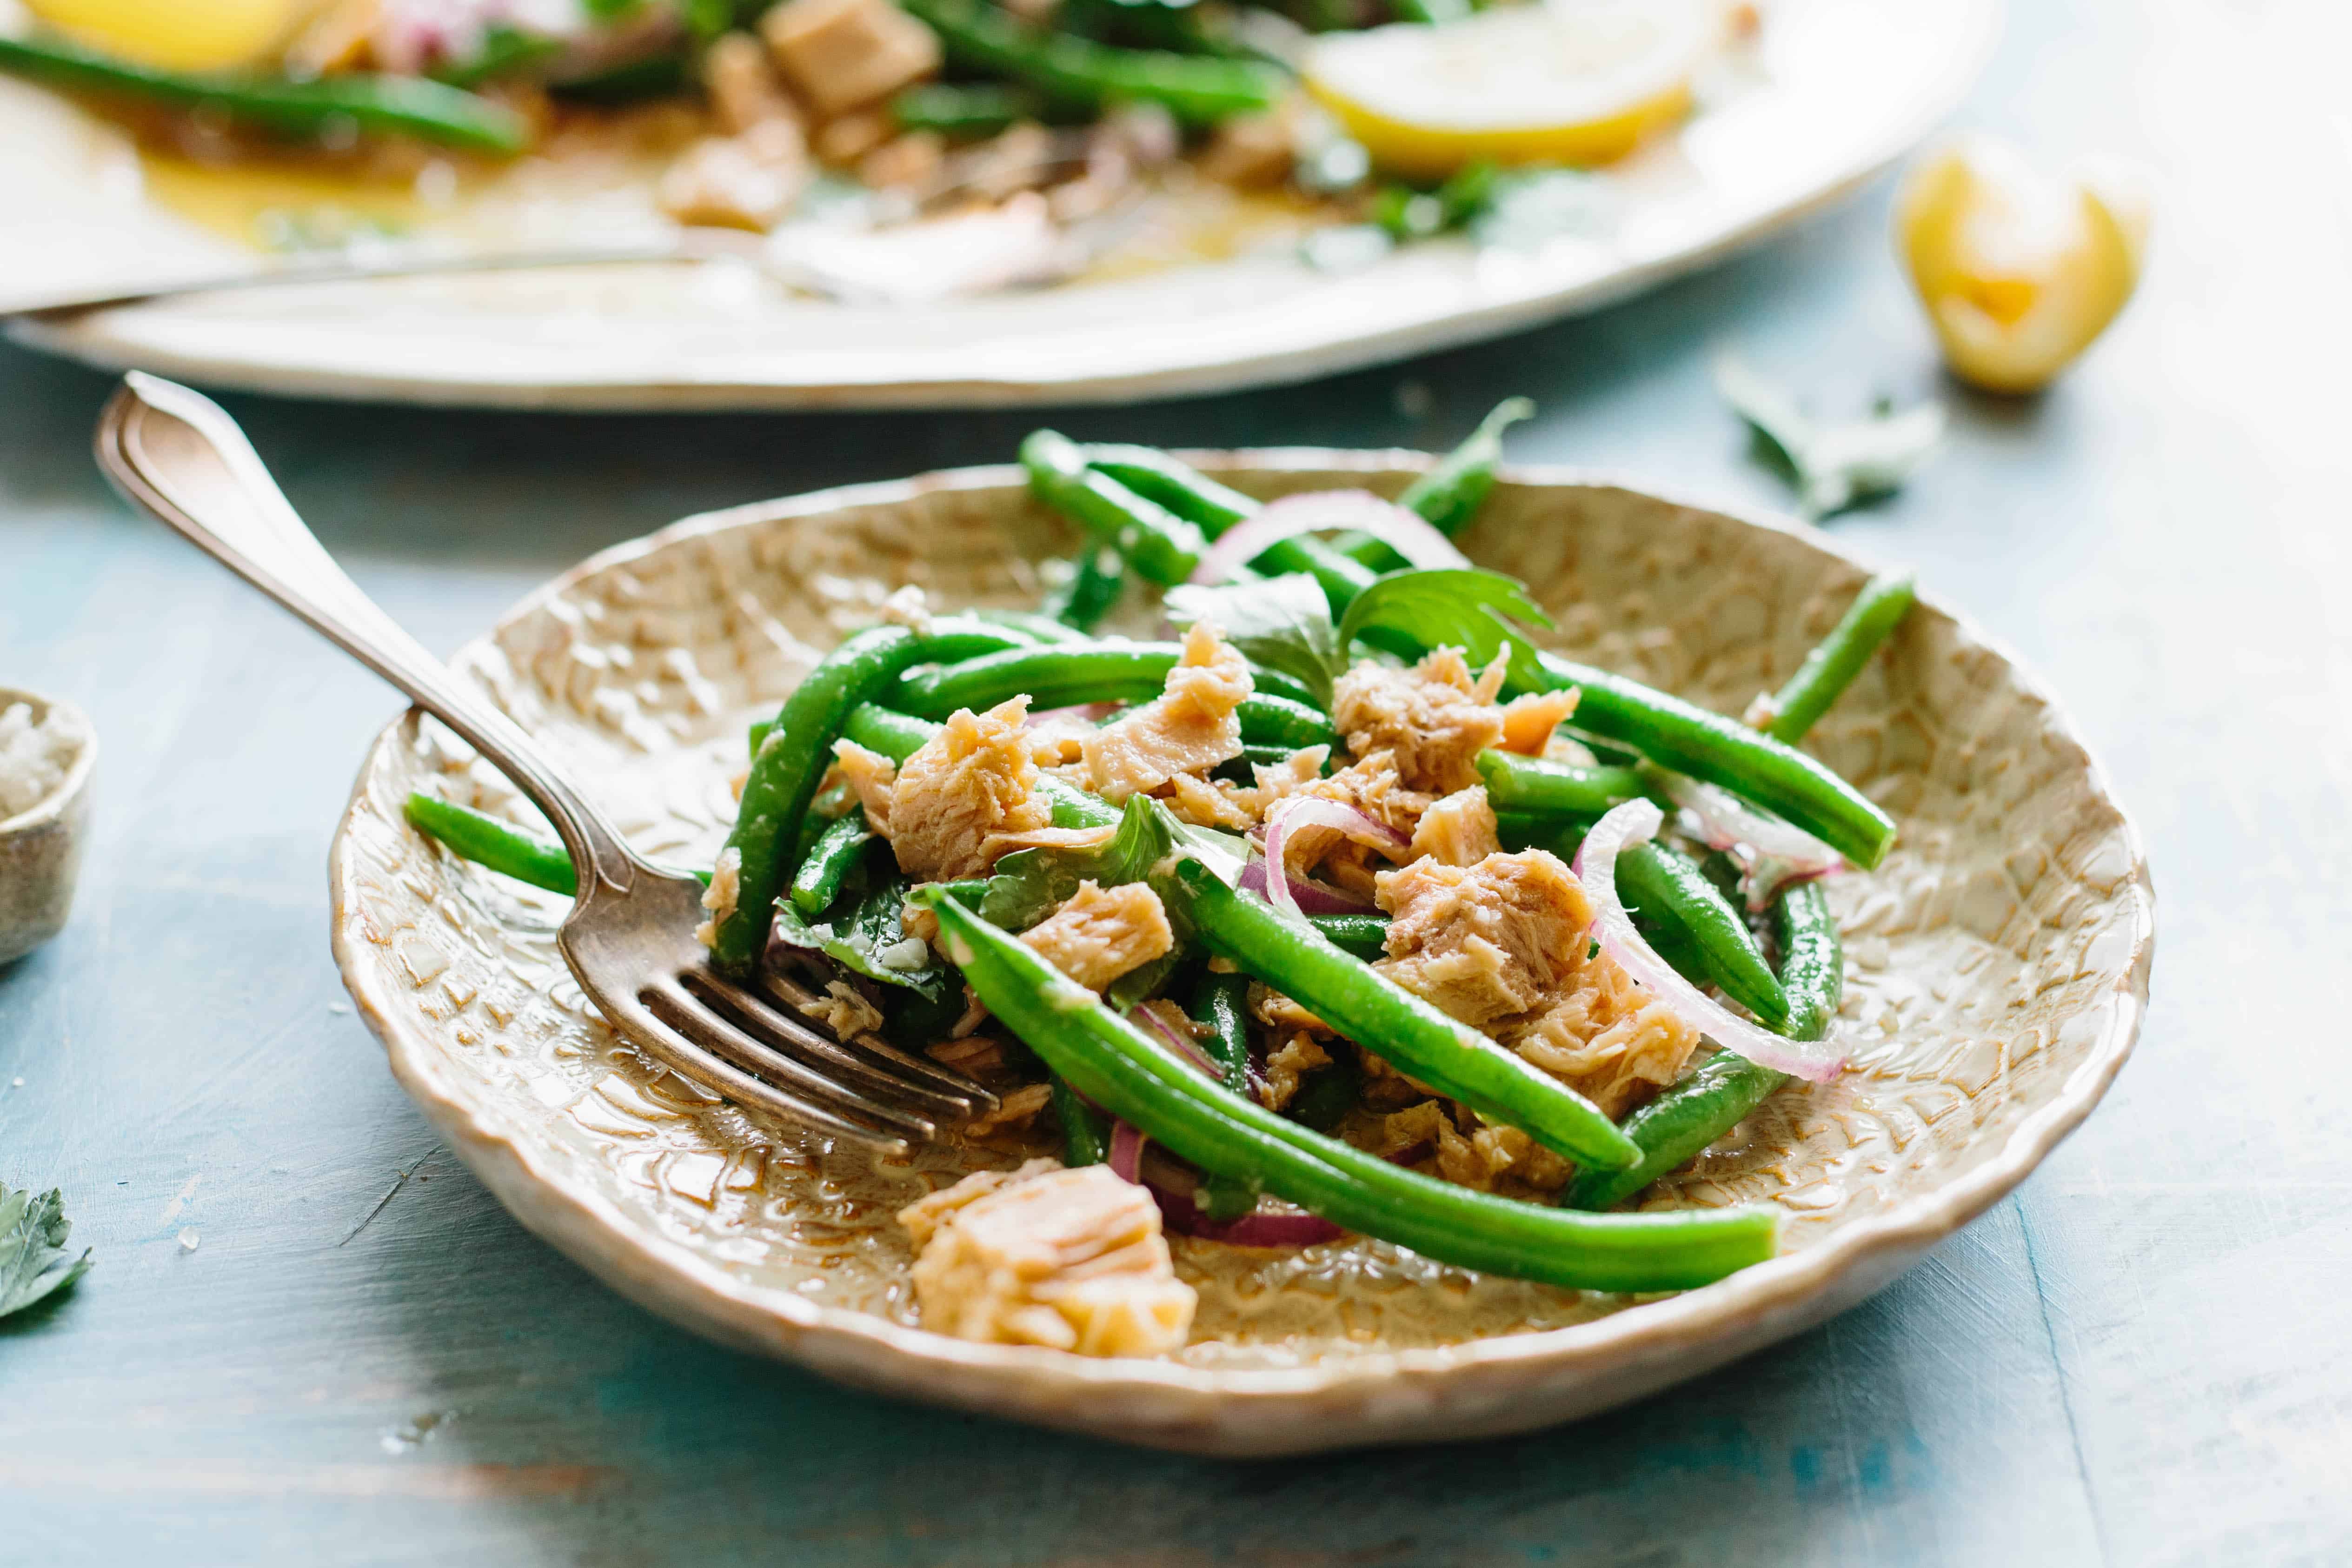 Small tan plate with a serving of green bean salad with tuna and onion.